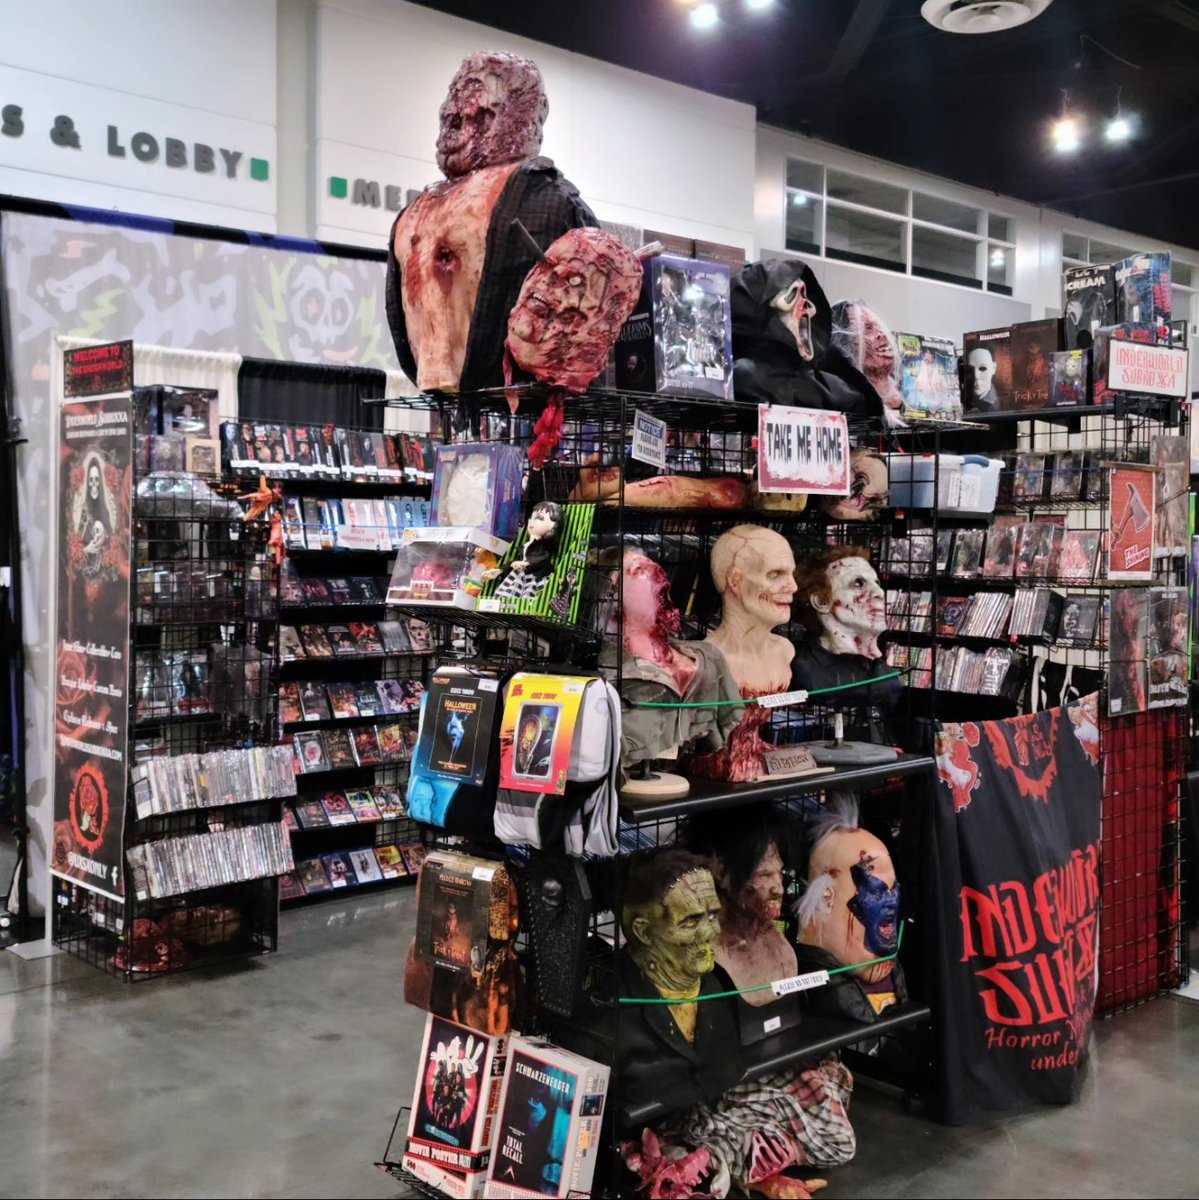 Day 1 of @creepiecon  is here!! Swing by Booth 502 and grab some gore! #underworldsubroxxa #xxtremeteam #horrorshop #extremecinema #indiefilms #indiehorror #gorehounds #horrorcon #horrorevents #inlandempire  #horroraddicts #collectors #collectibles #physicalmediaforever